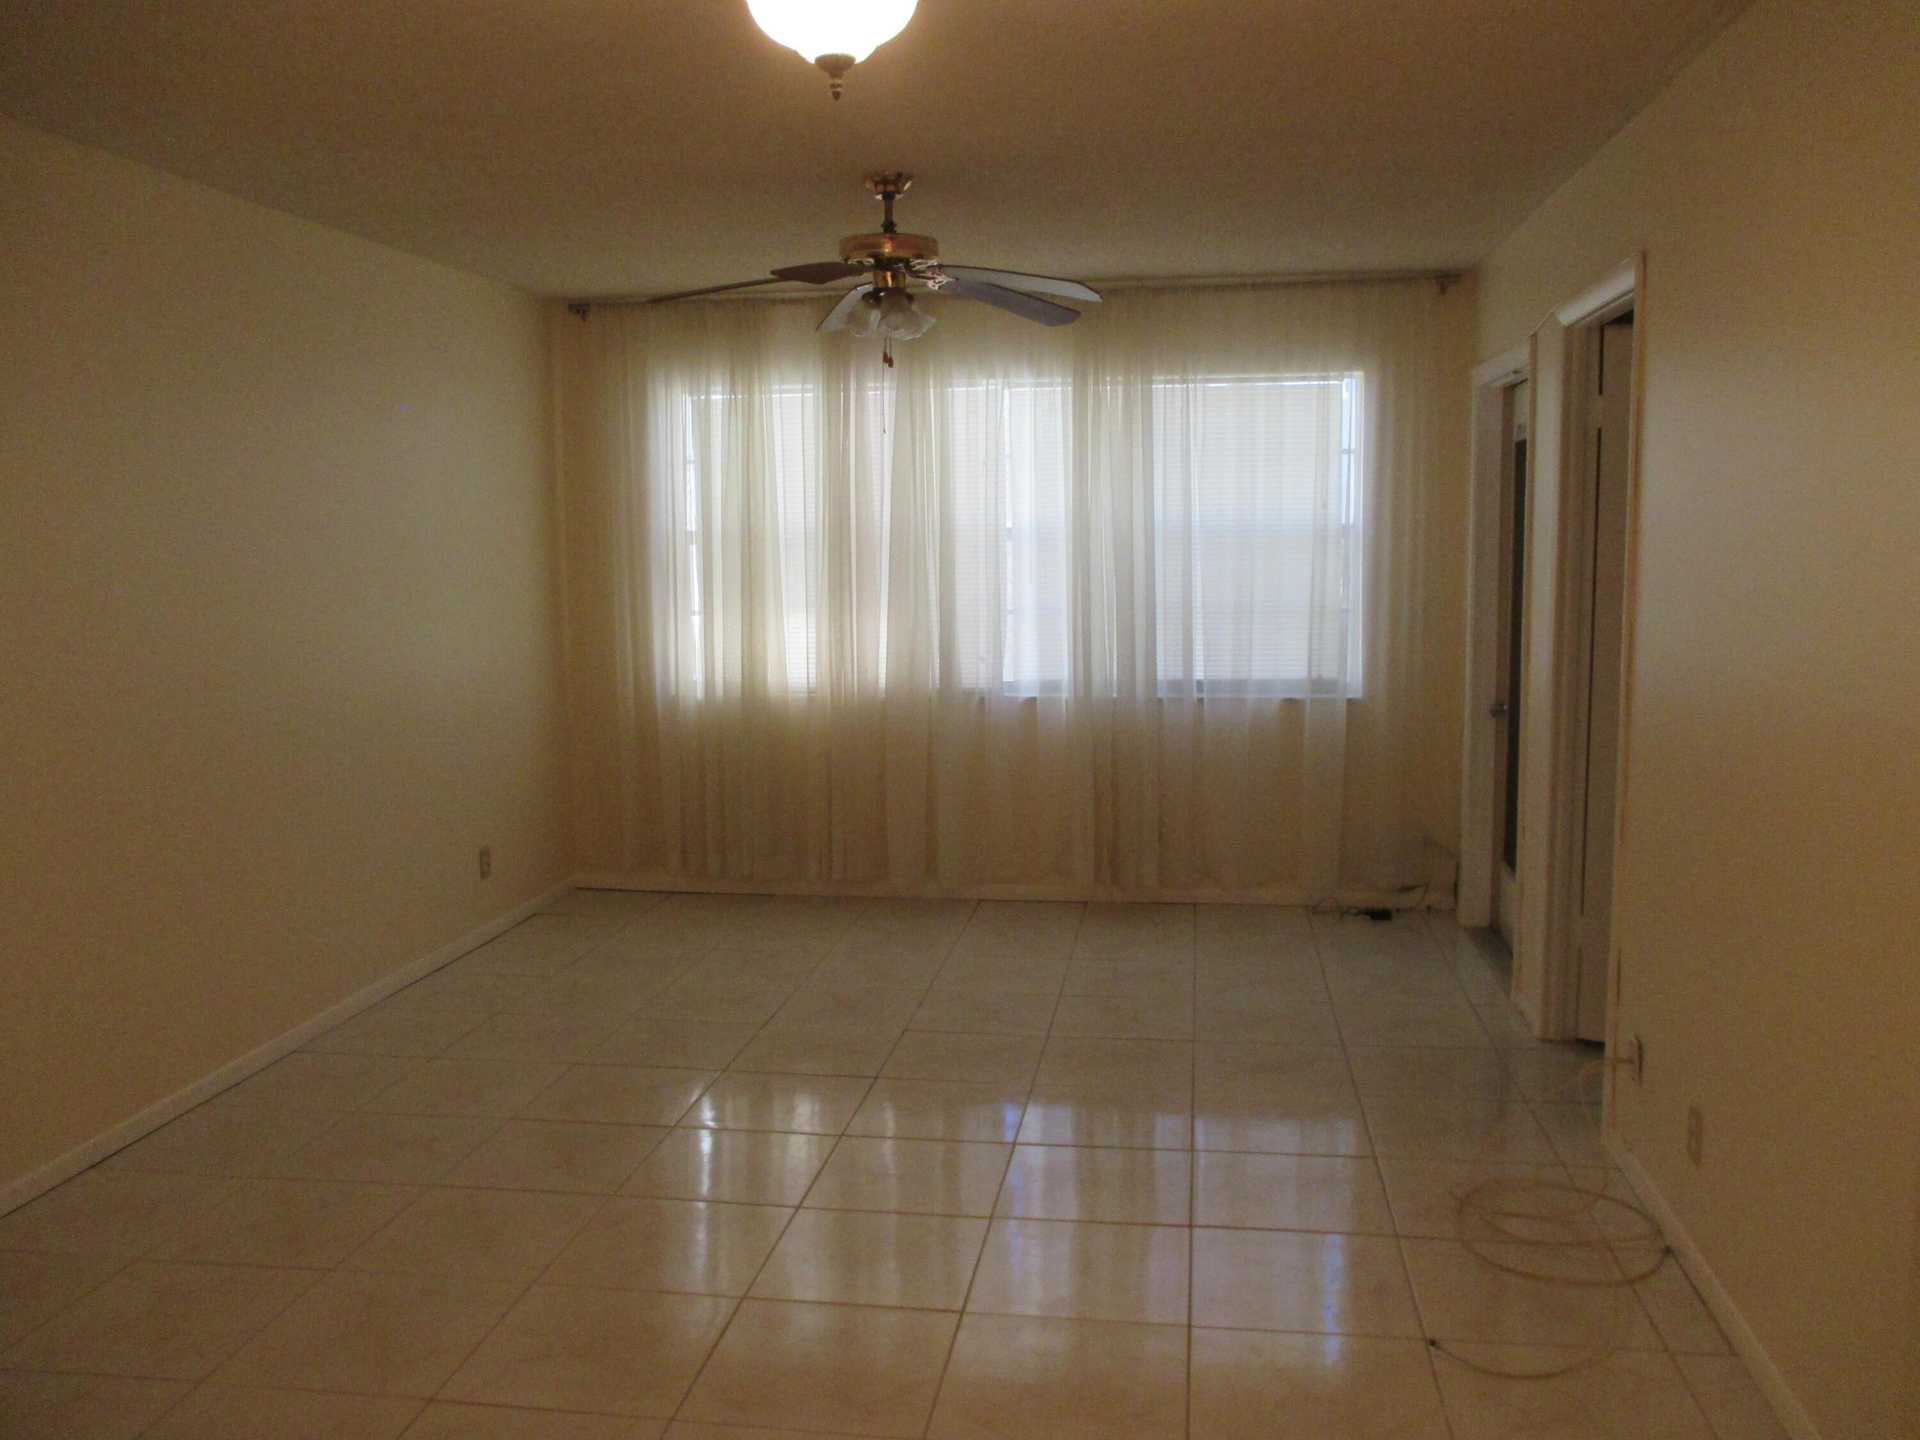 Huis in West Palm Beach, Florida 11621414